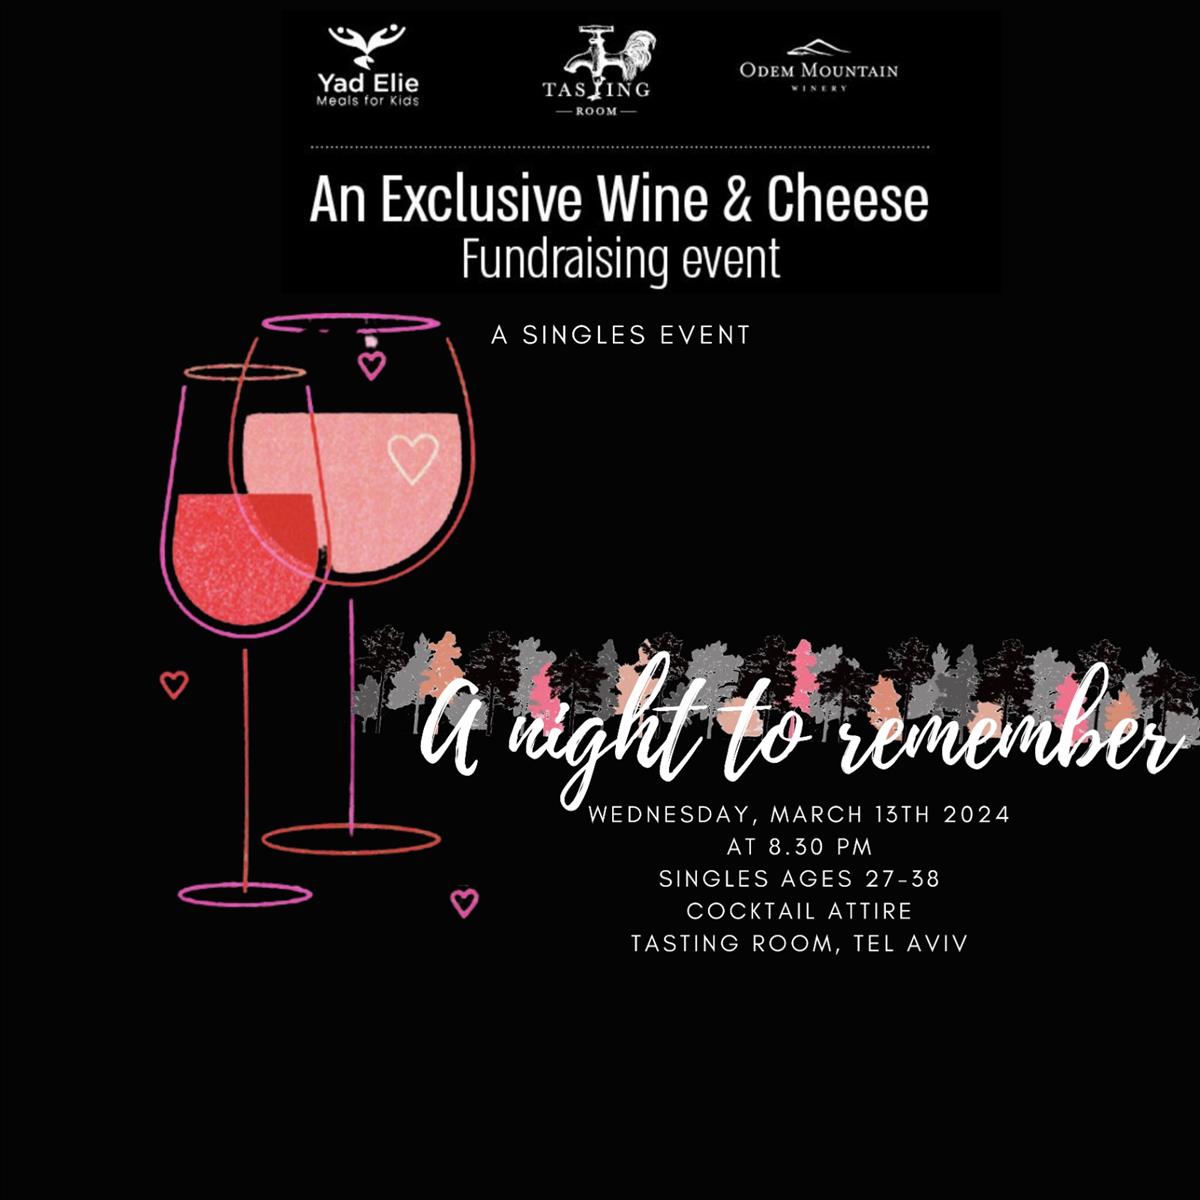 An Exclusive Wine & Cheese Fundraising Event